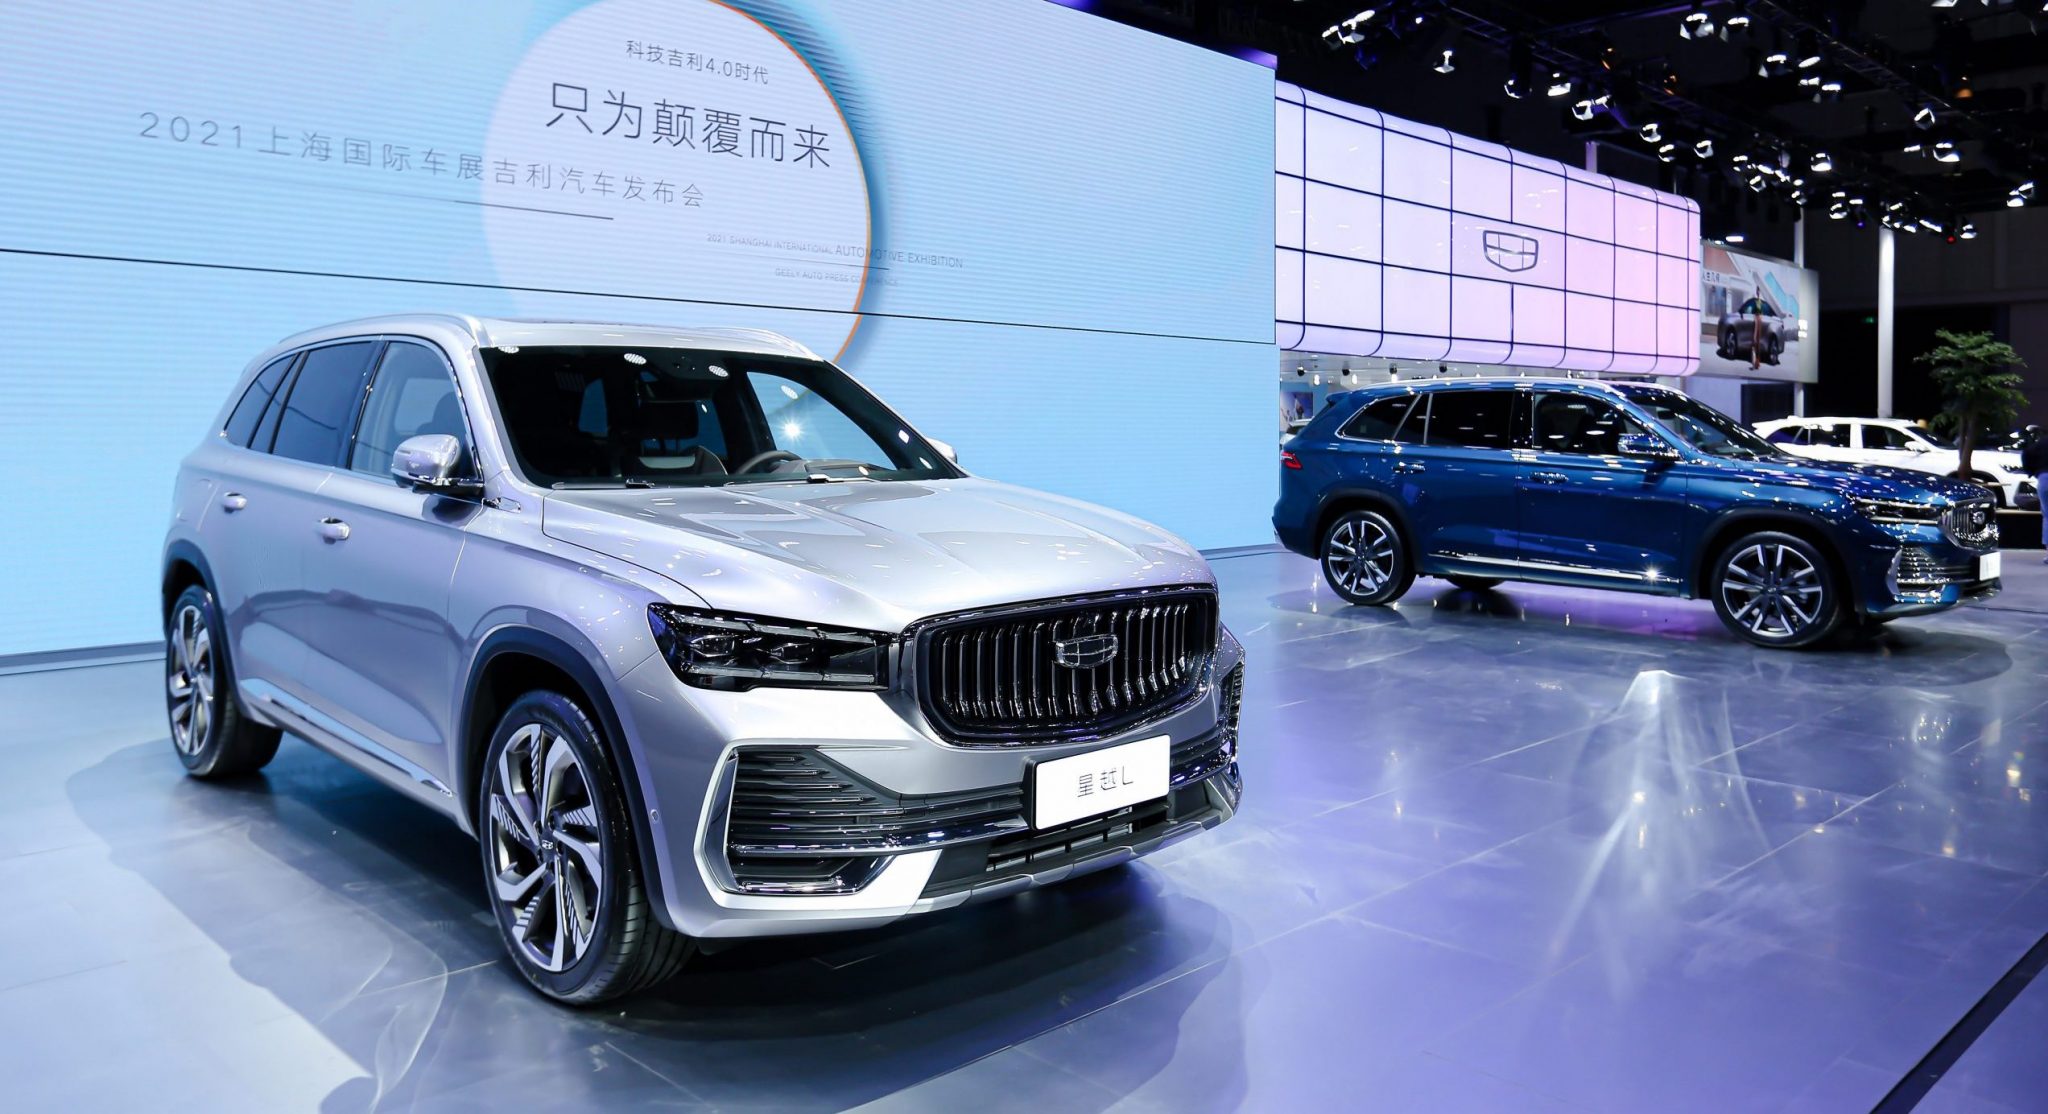 The Xingyue L Is Geely's New Flagship Model - Automacha